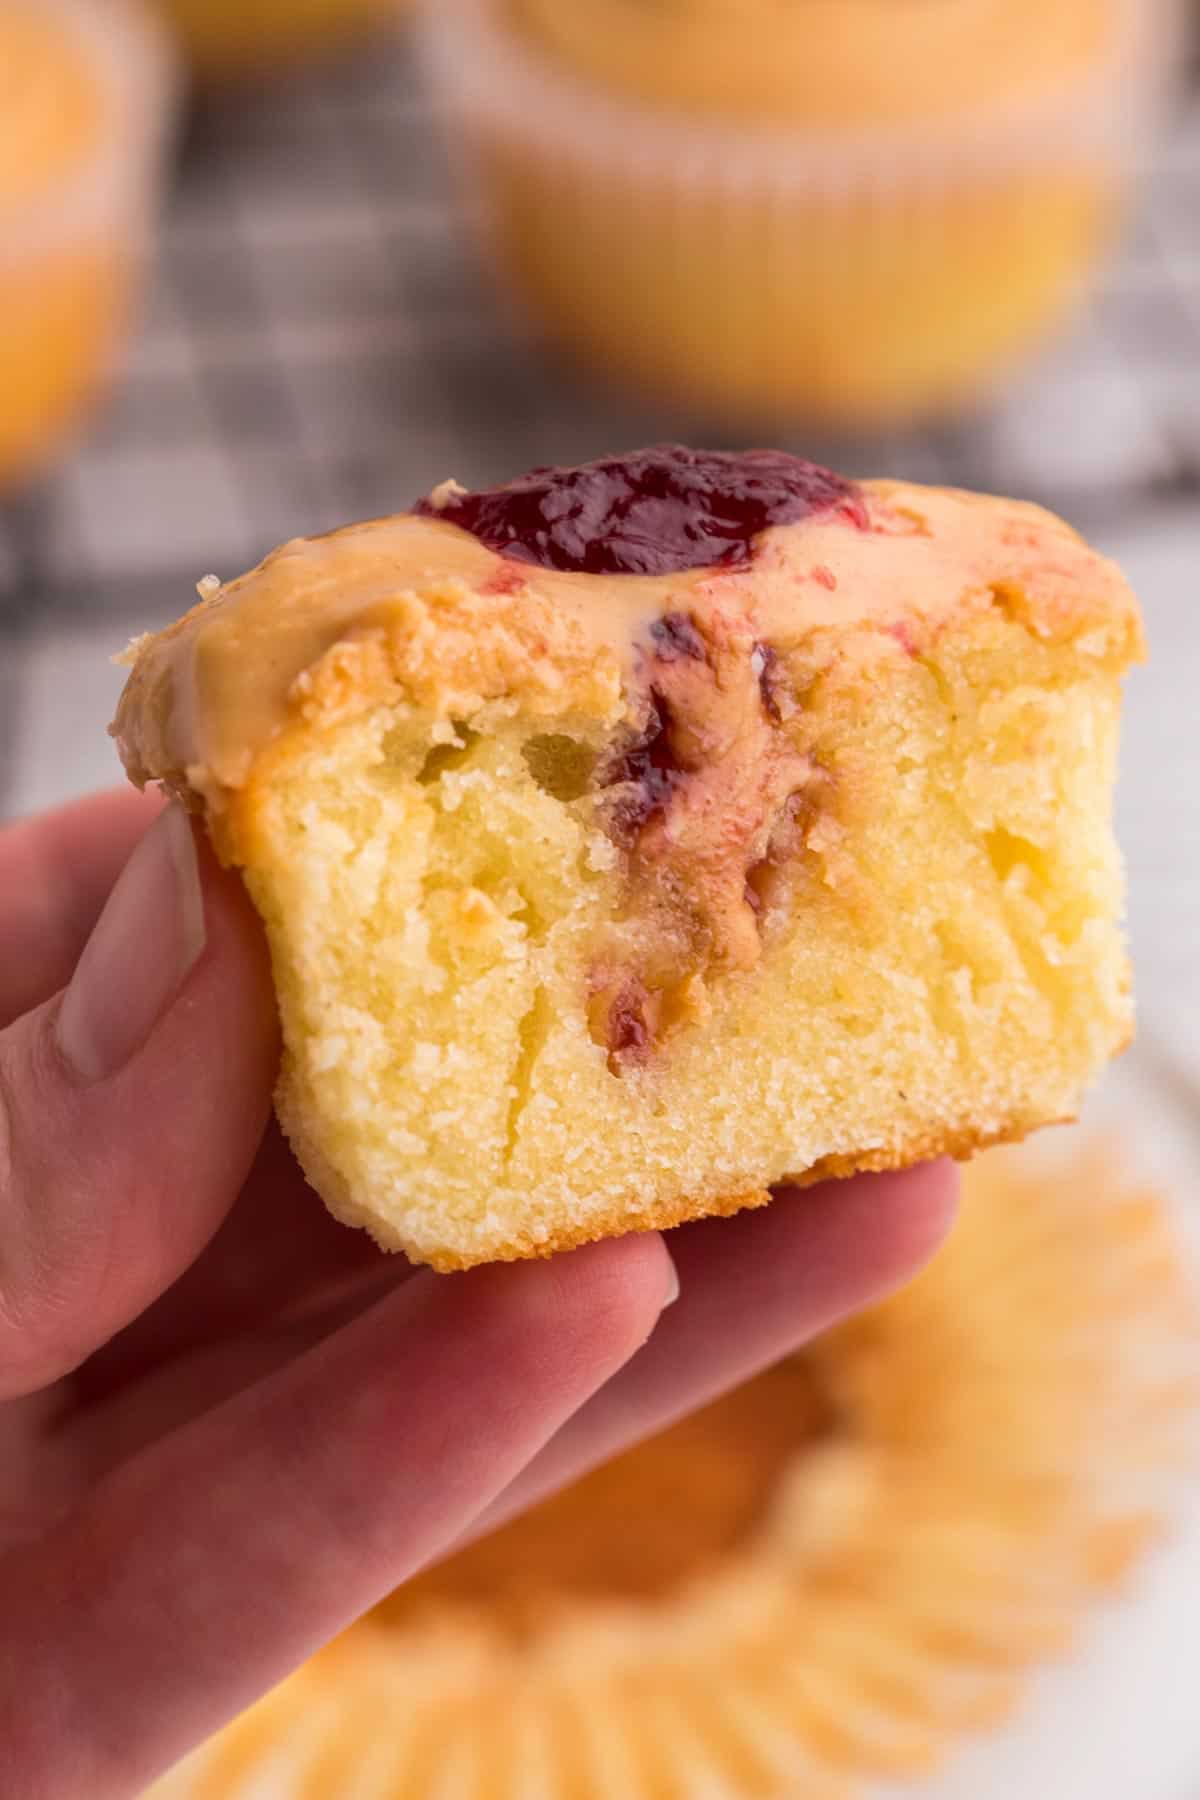 hand holding a cupcake cut in half to see the peanut butter and jelly filling